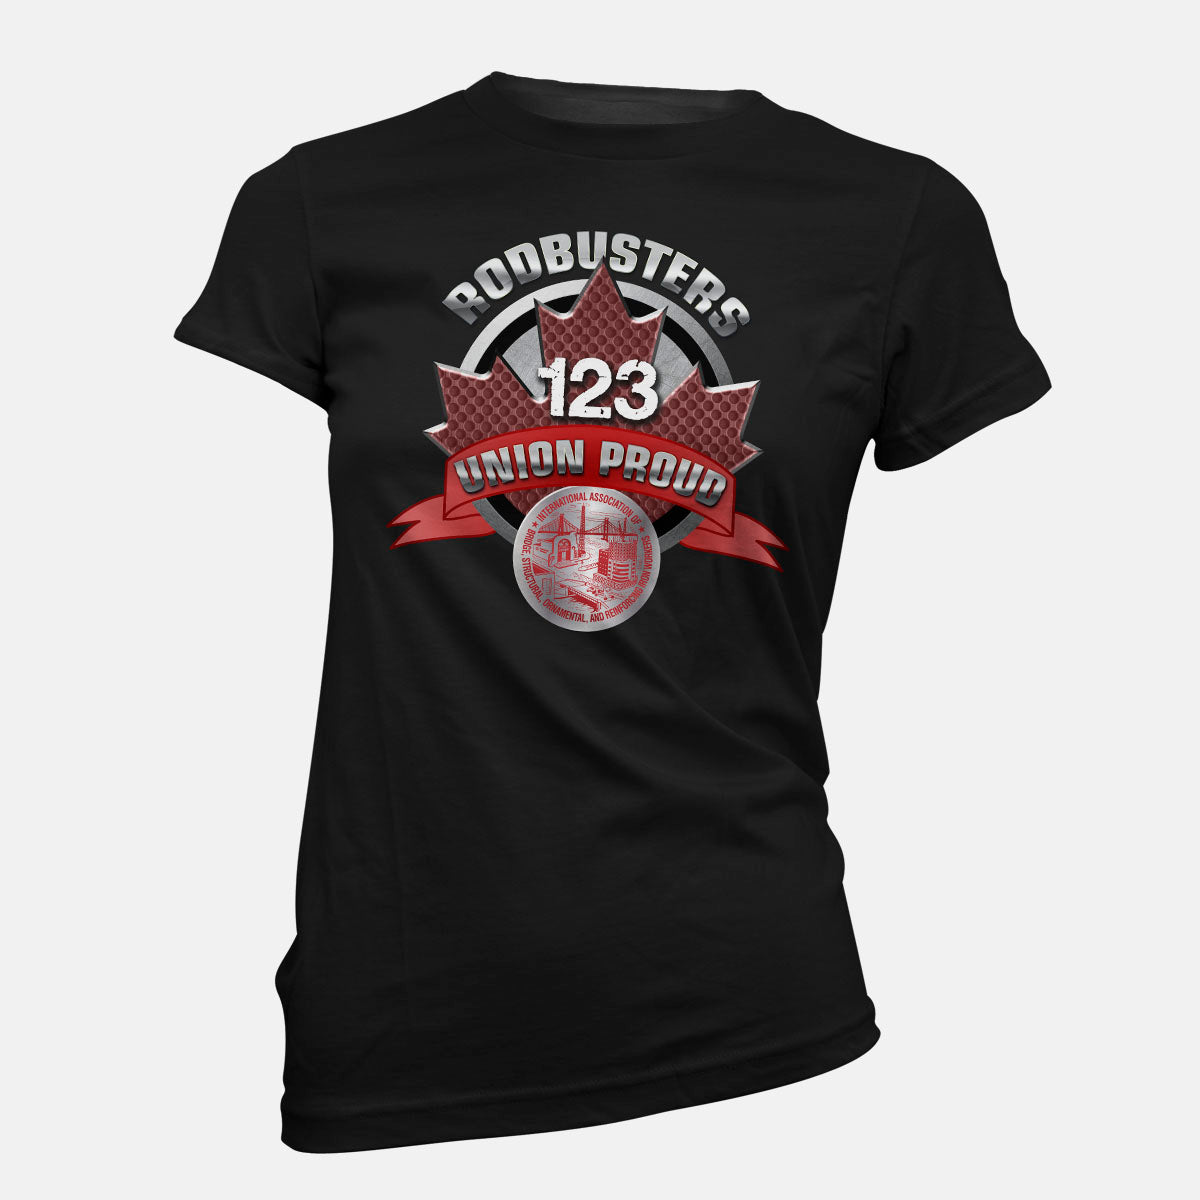 IW Rodbusters Round Canada Apparel